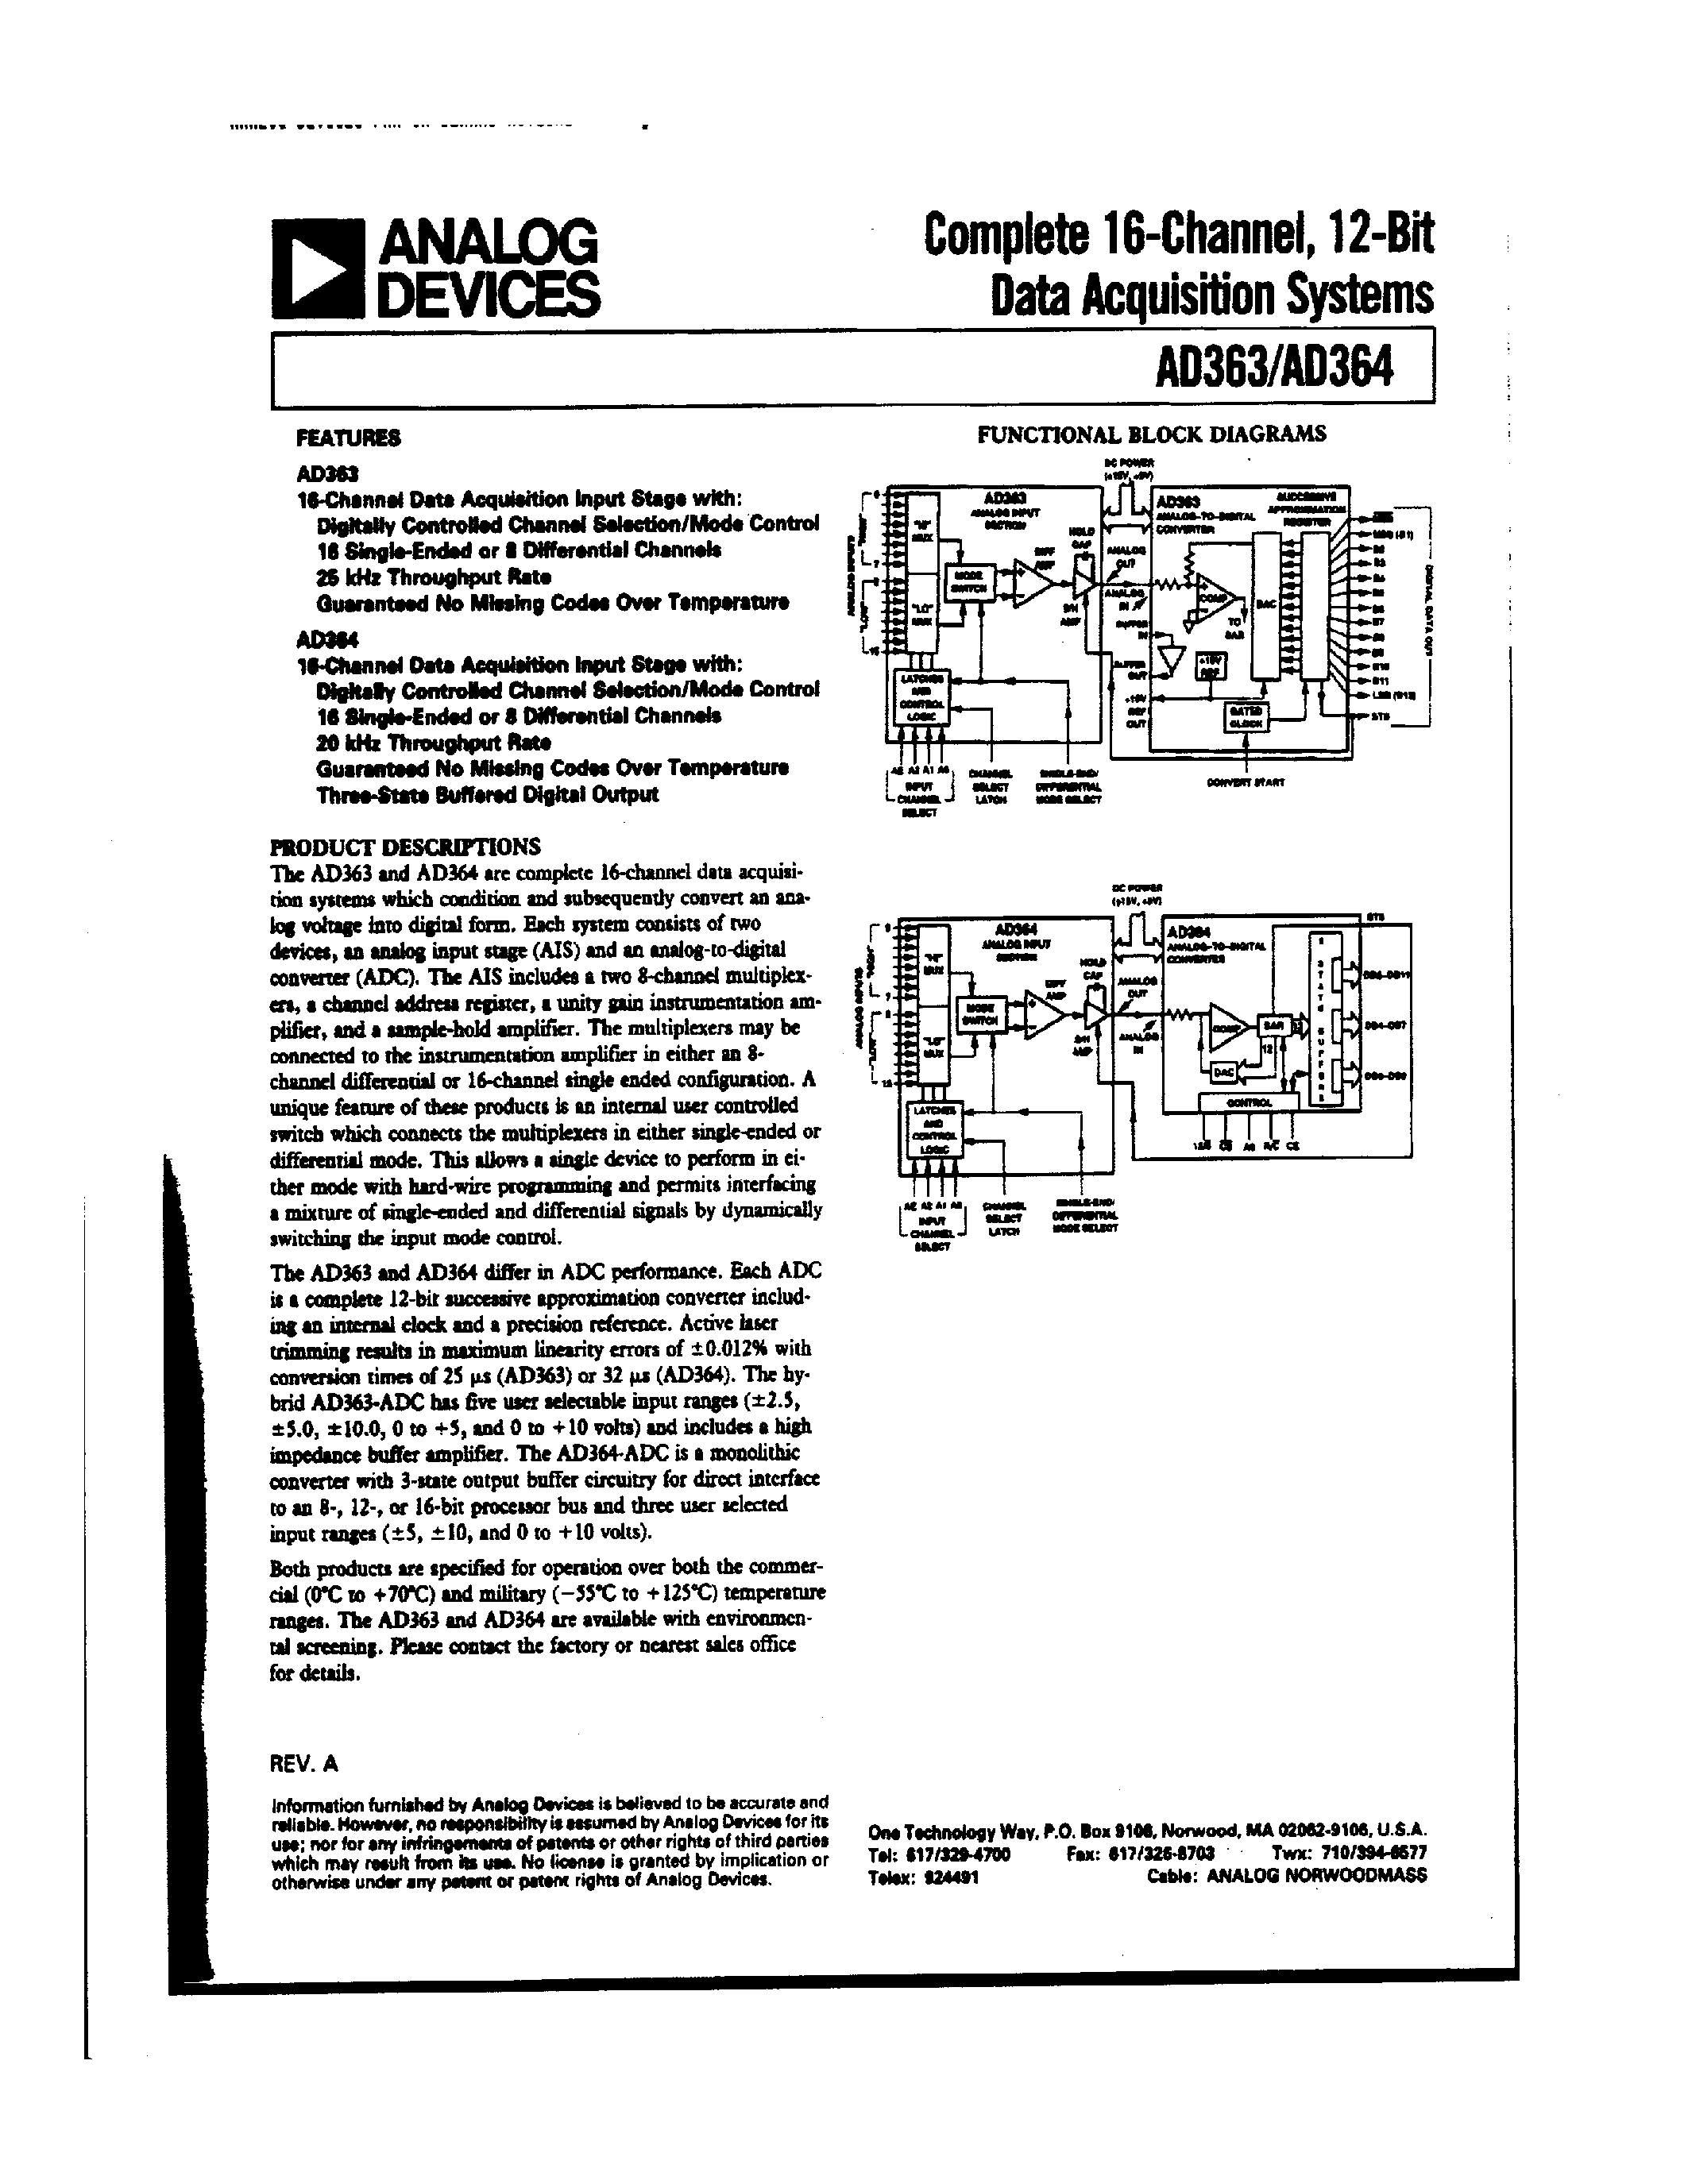 Datasheet AD363RK - Complete 16-Channel/12-Bit Data Acquisition System page 1